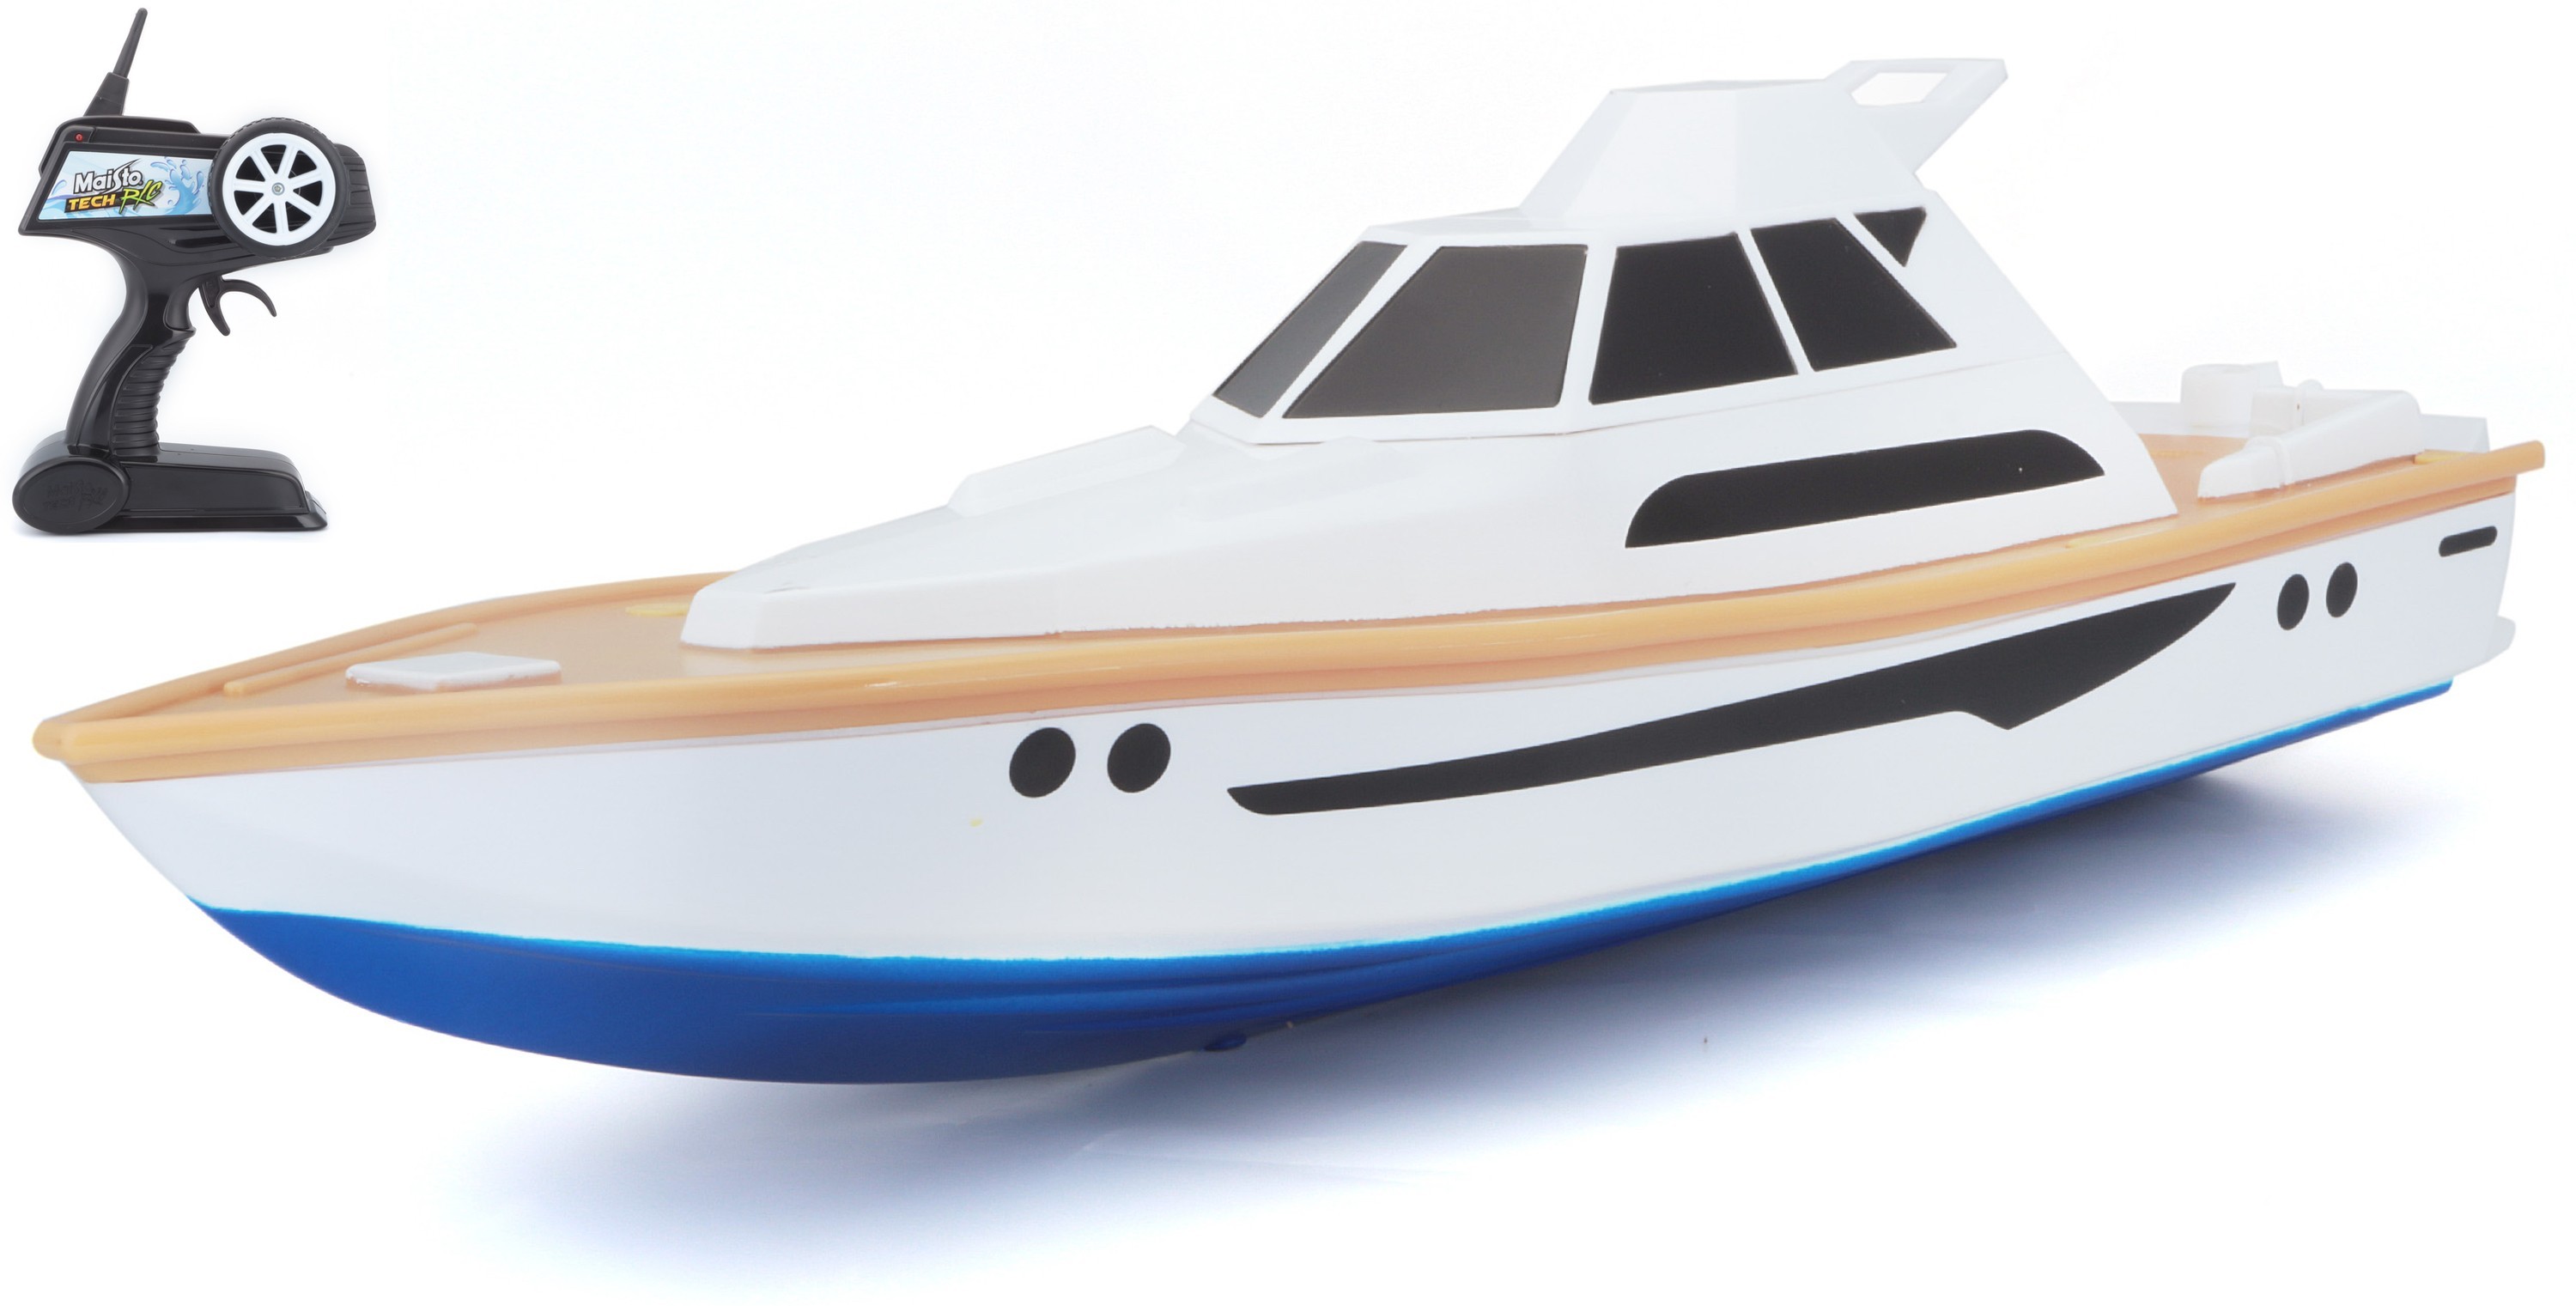 HI-SPEED BOAT LUXURY YACHT 2.4 GHz RADIO CONTROLE (USB rechargeable)